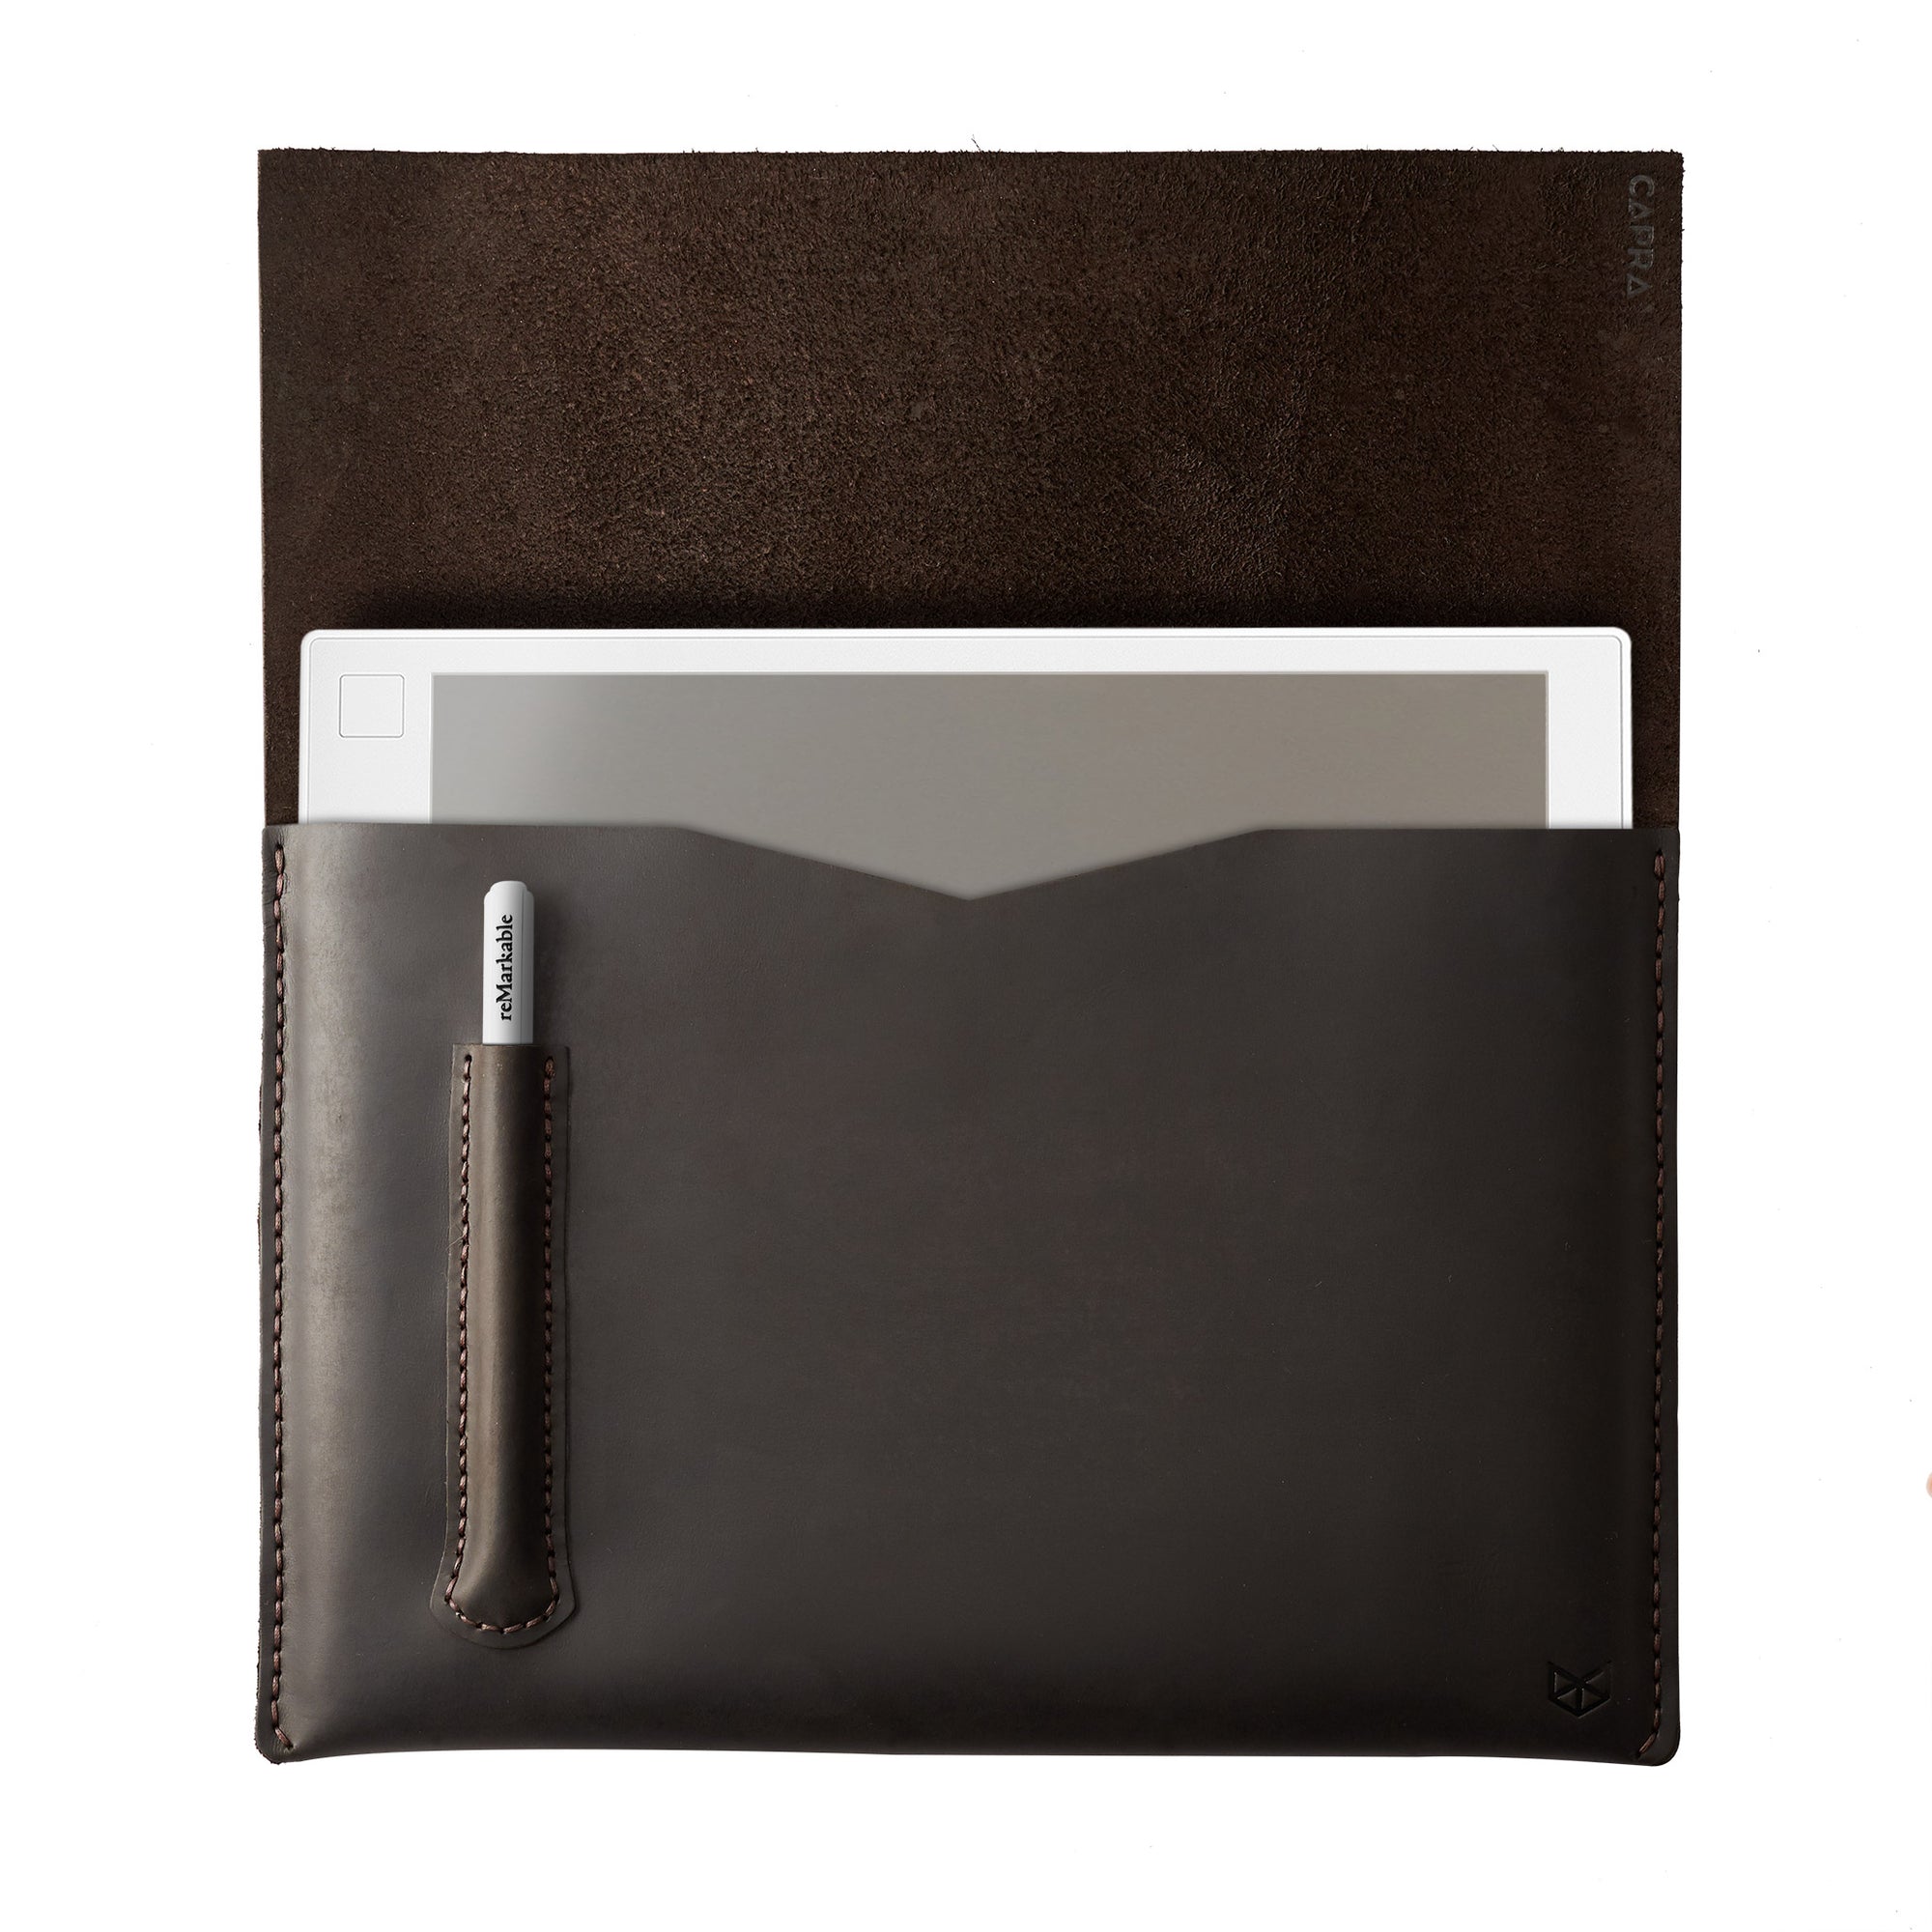 Style hold by model. Marron draftsman 2 case by Capra Leather. Remarkable sleeve.